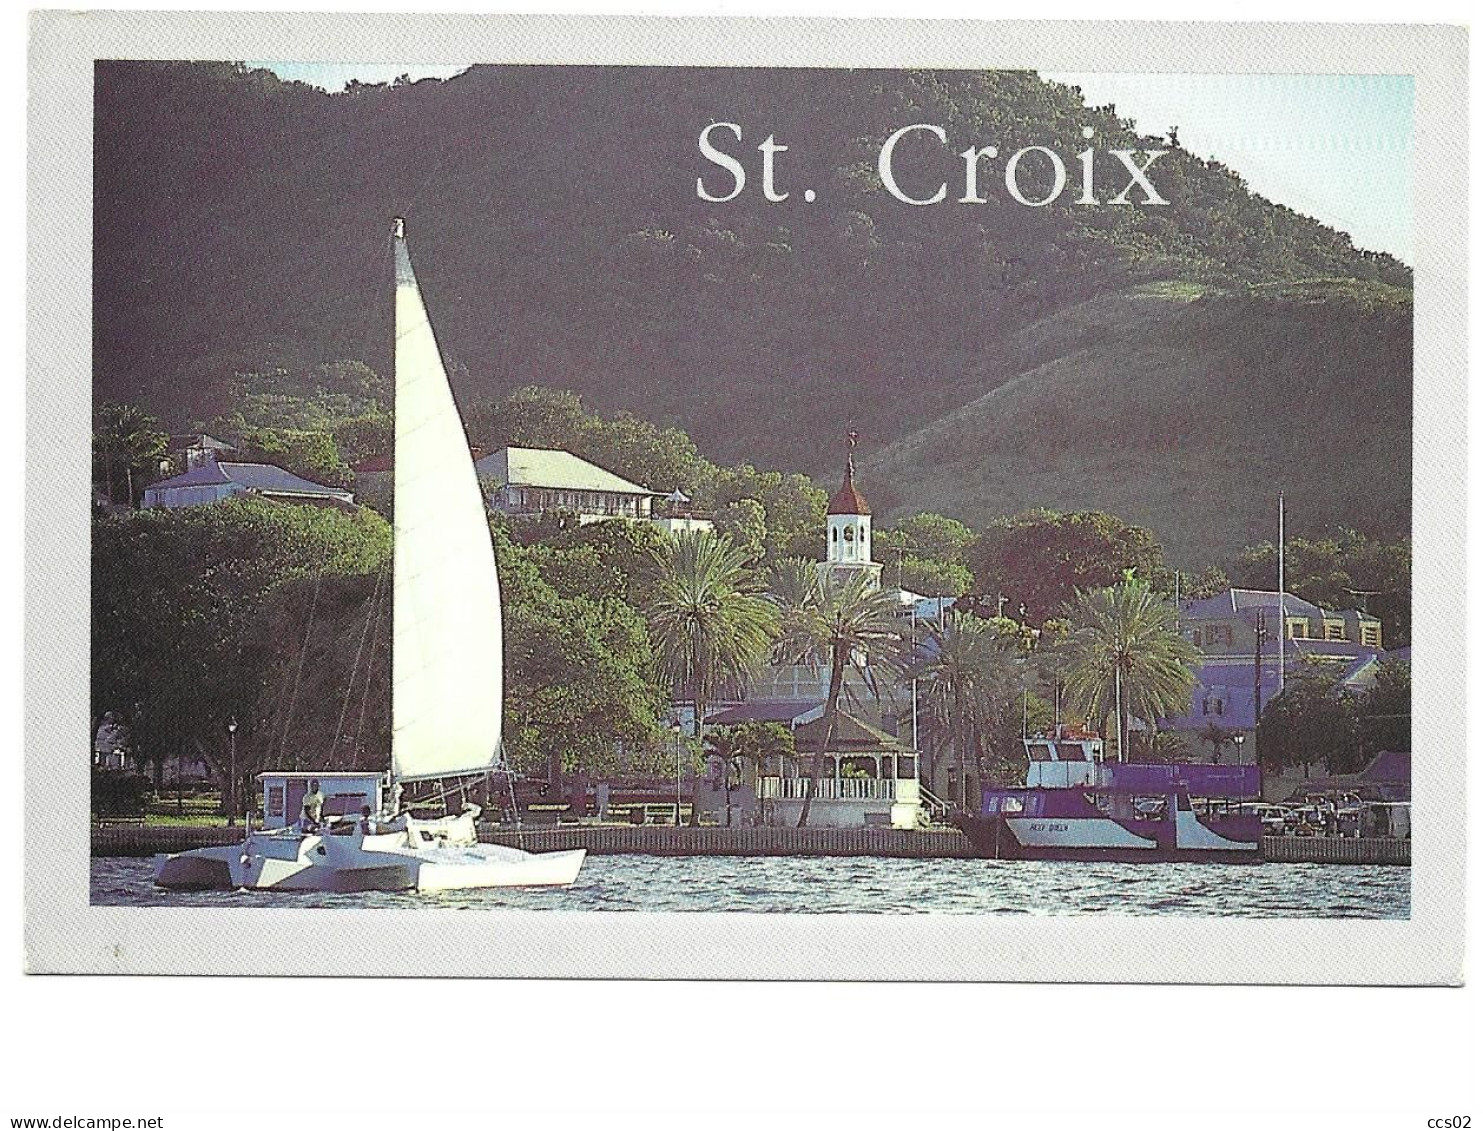 St. Croix A View Of Christiansted From The Harbor - Virgin Islands, US